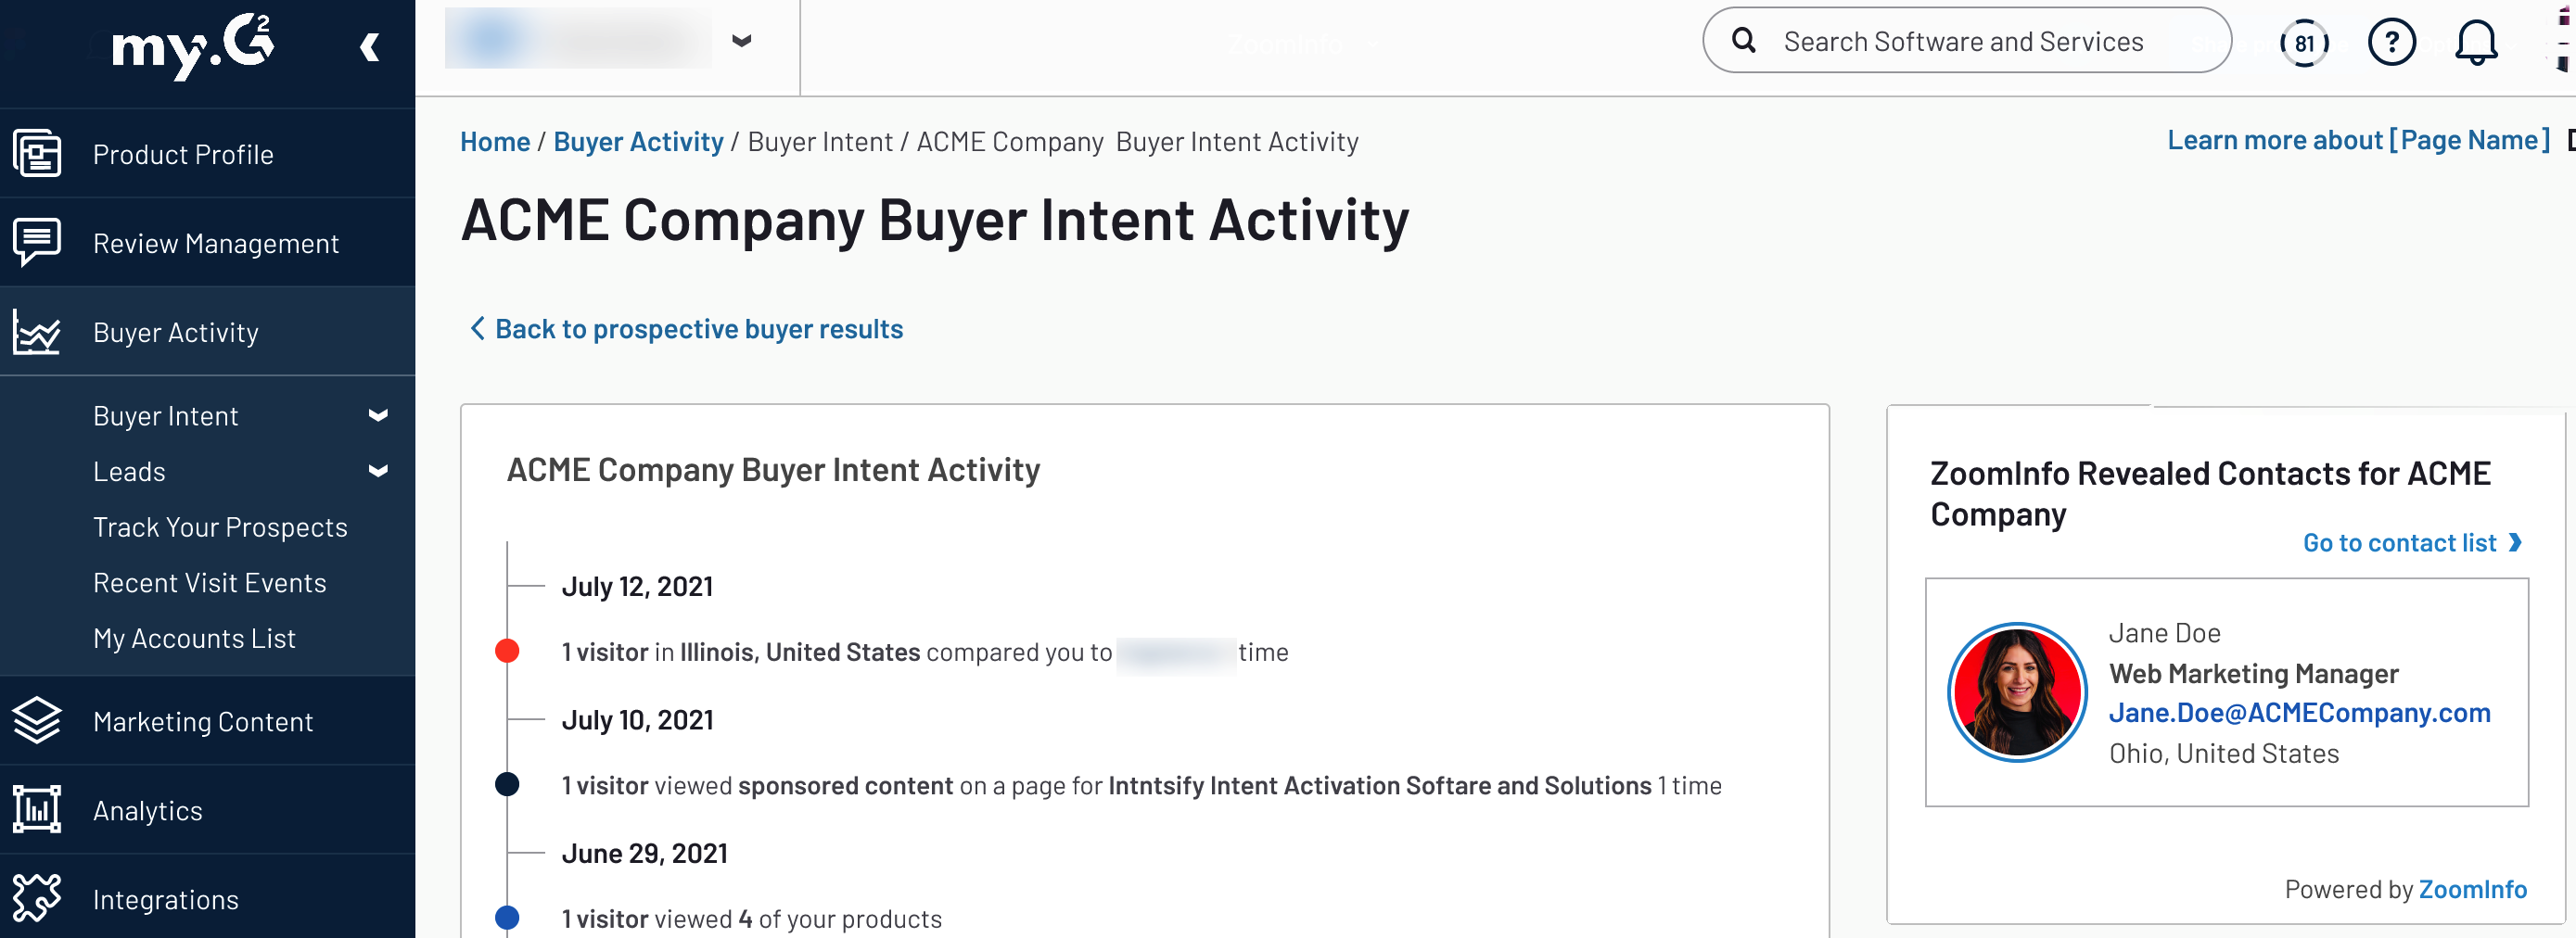 image of zoominfo contact data on the buyer intent page